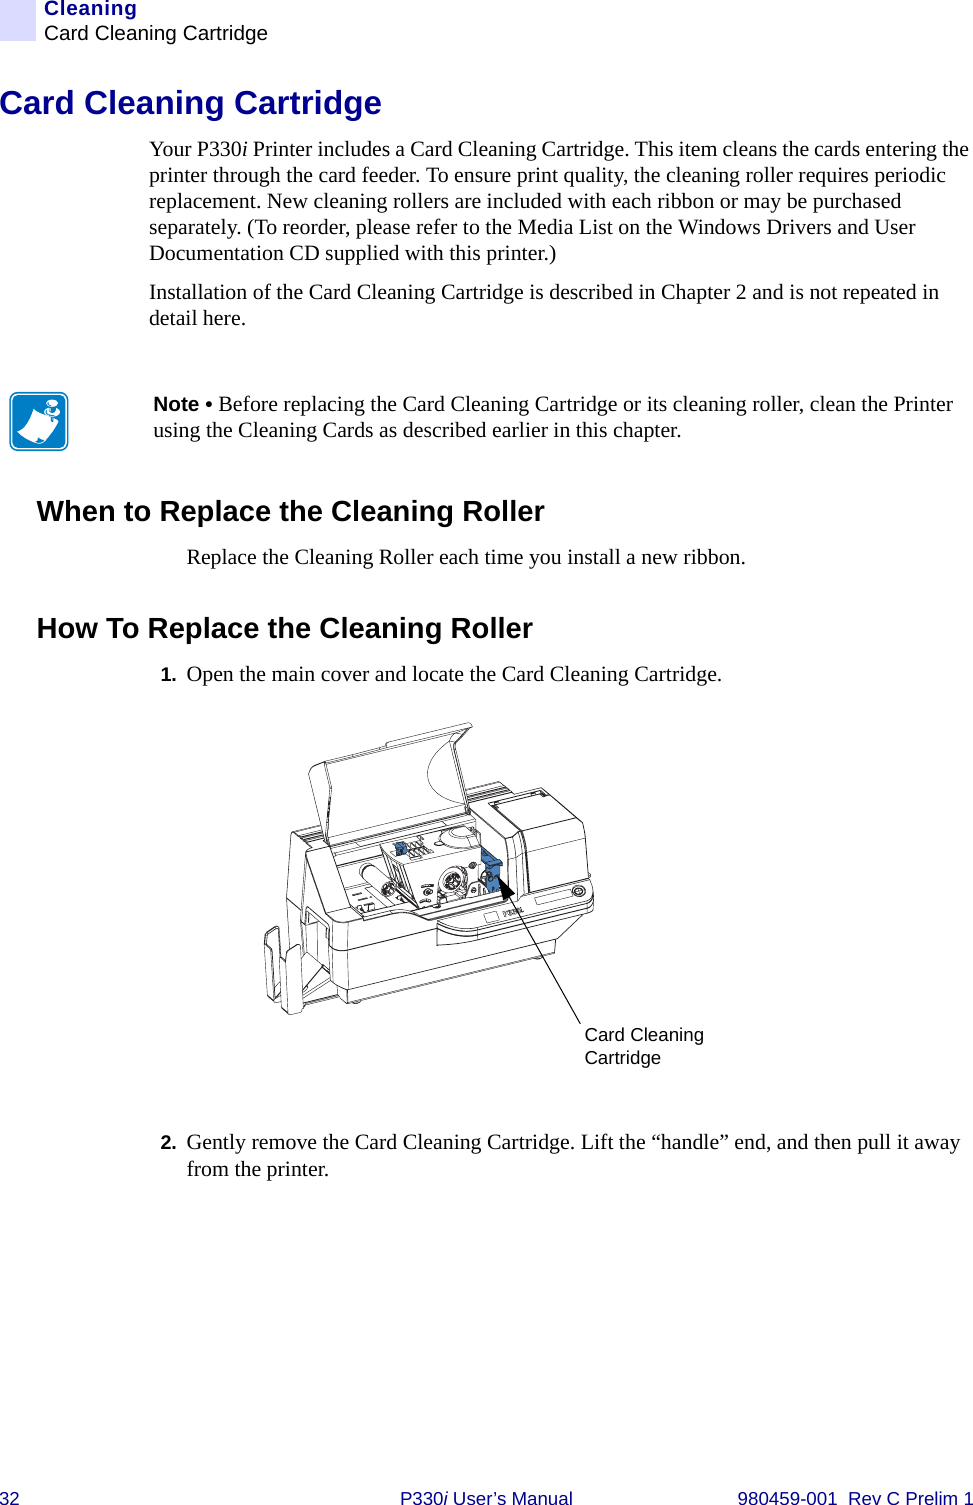 32 P330i User’s Manual 980459-001  Rev C Prelim 1CleaningCard Cleaning CartridgeCard Cleaning CartridgeYour P330i Printer includes a Card Cleaning Cartridge. This item cleans the cards entering the printer through the card feeder. To ensure print quality, the cleaning roller requires periodic replacement. New cleaning rollers are included with each ribbon or may be purchased separately. (To reorder, please refer to the Media List on the Windows Drivers and User Documentation CD supplied with this printer.)Installation of the Card Cleaning Cartridge is described in Chapter 2 and is not repeated in detail here.When to Replace the Cleaning RollerReplace the Cleaning Roller each time you install a new ribbon.How To Replace the Cleaning Roller1. Open the main cover and locate the Card Cleaning Cartridge.2. Gently remove the Card Cleaning Cartridge. Lift the “handle” end, and then pull it away from the printer.Note • Before replacing the Card Cleaning Cartridge or its cleaning roller, clean the Printer using the Cleaning Cards as described earlier in this chapter.Card Cleaning Cartridge